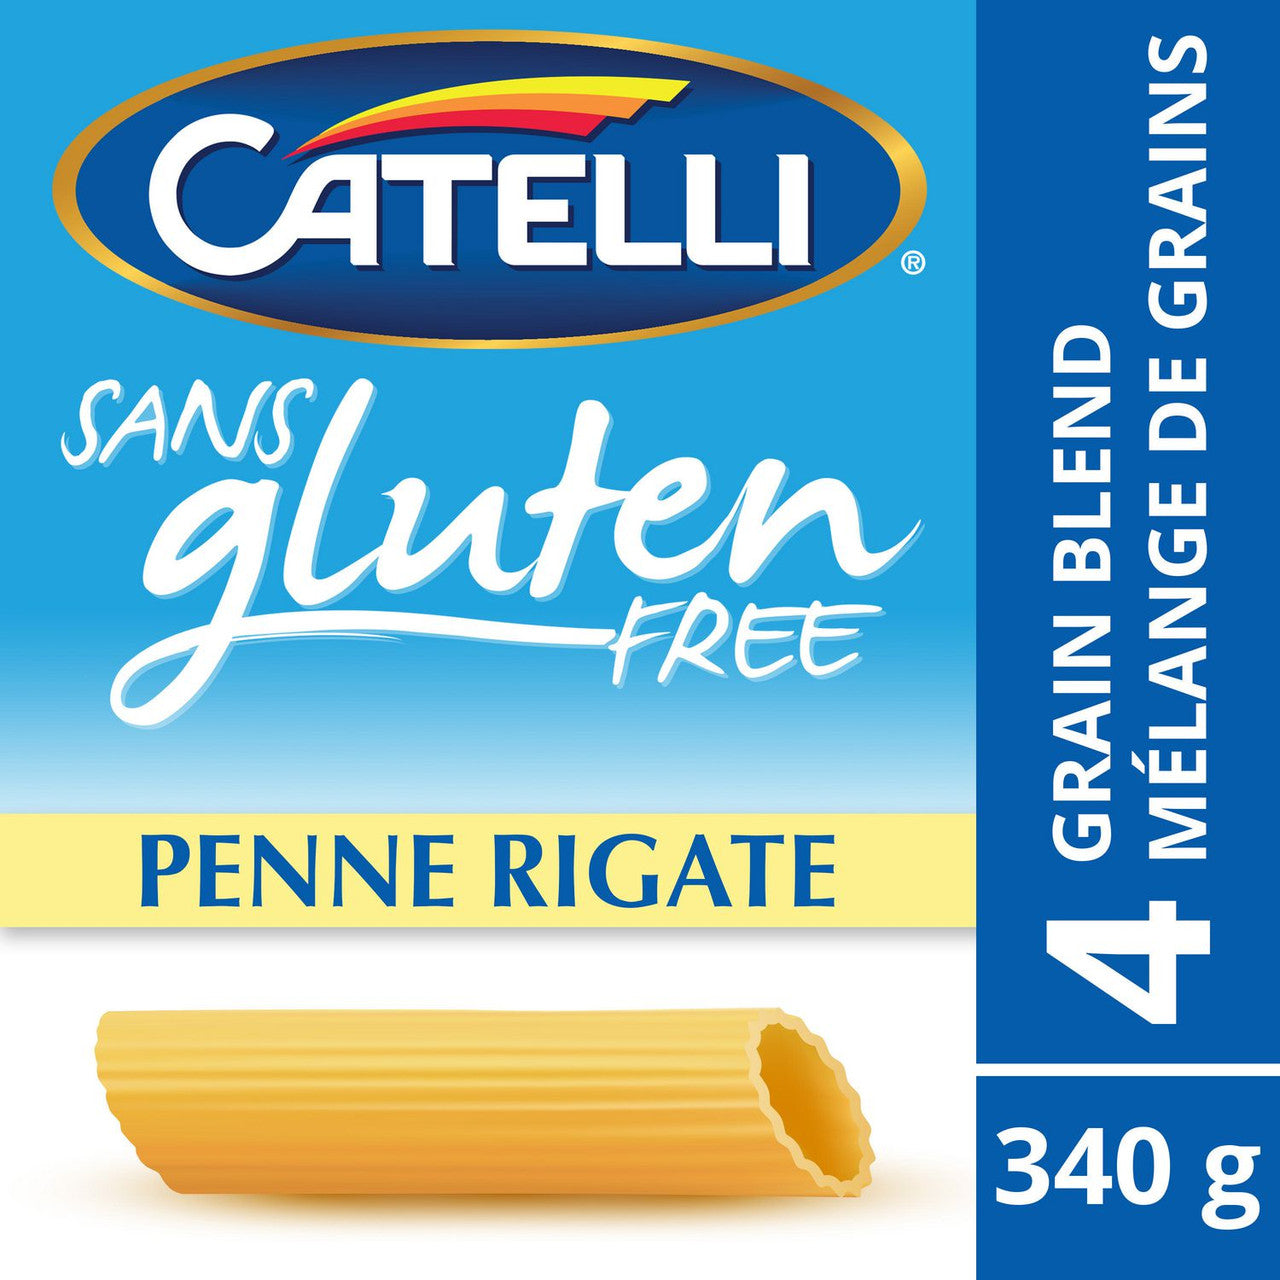 Catelli Gluten Free Penne Rigate Pasta, 340g/12 oz., {Imported from Canada}